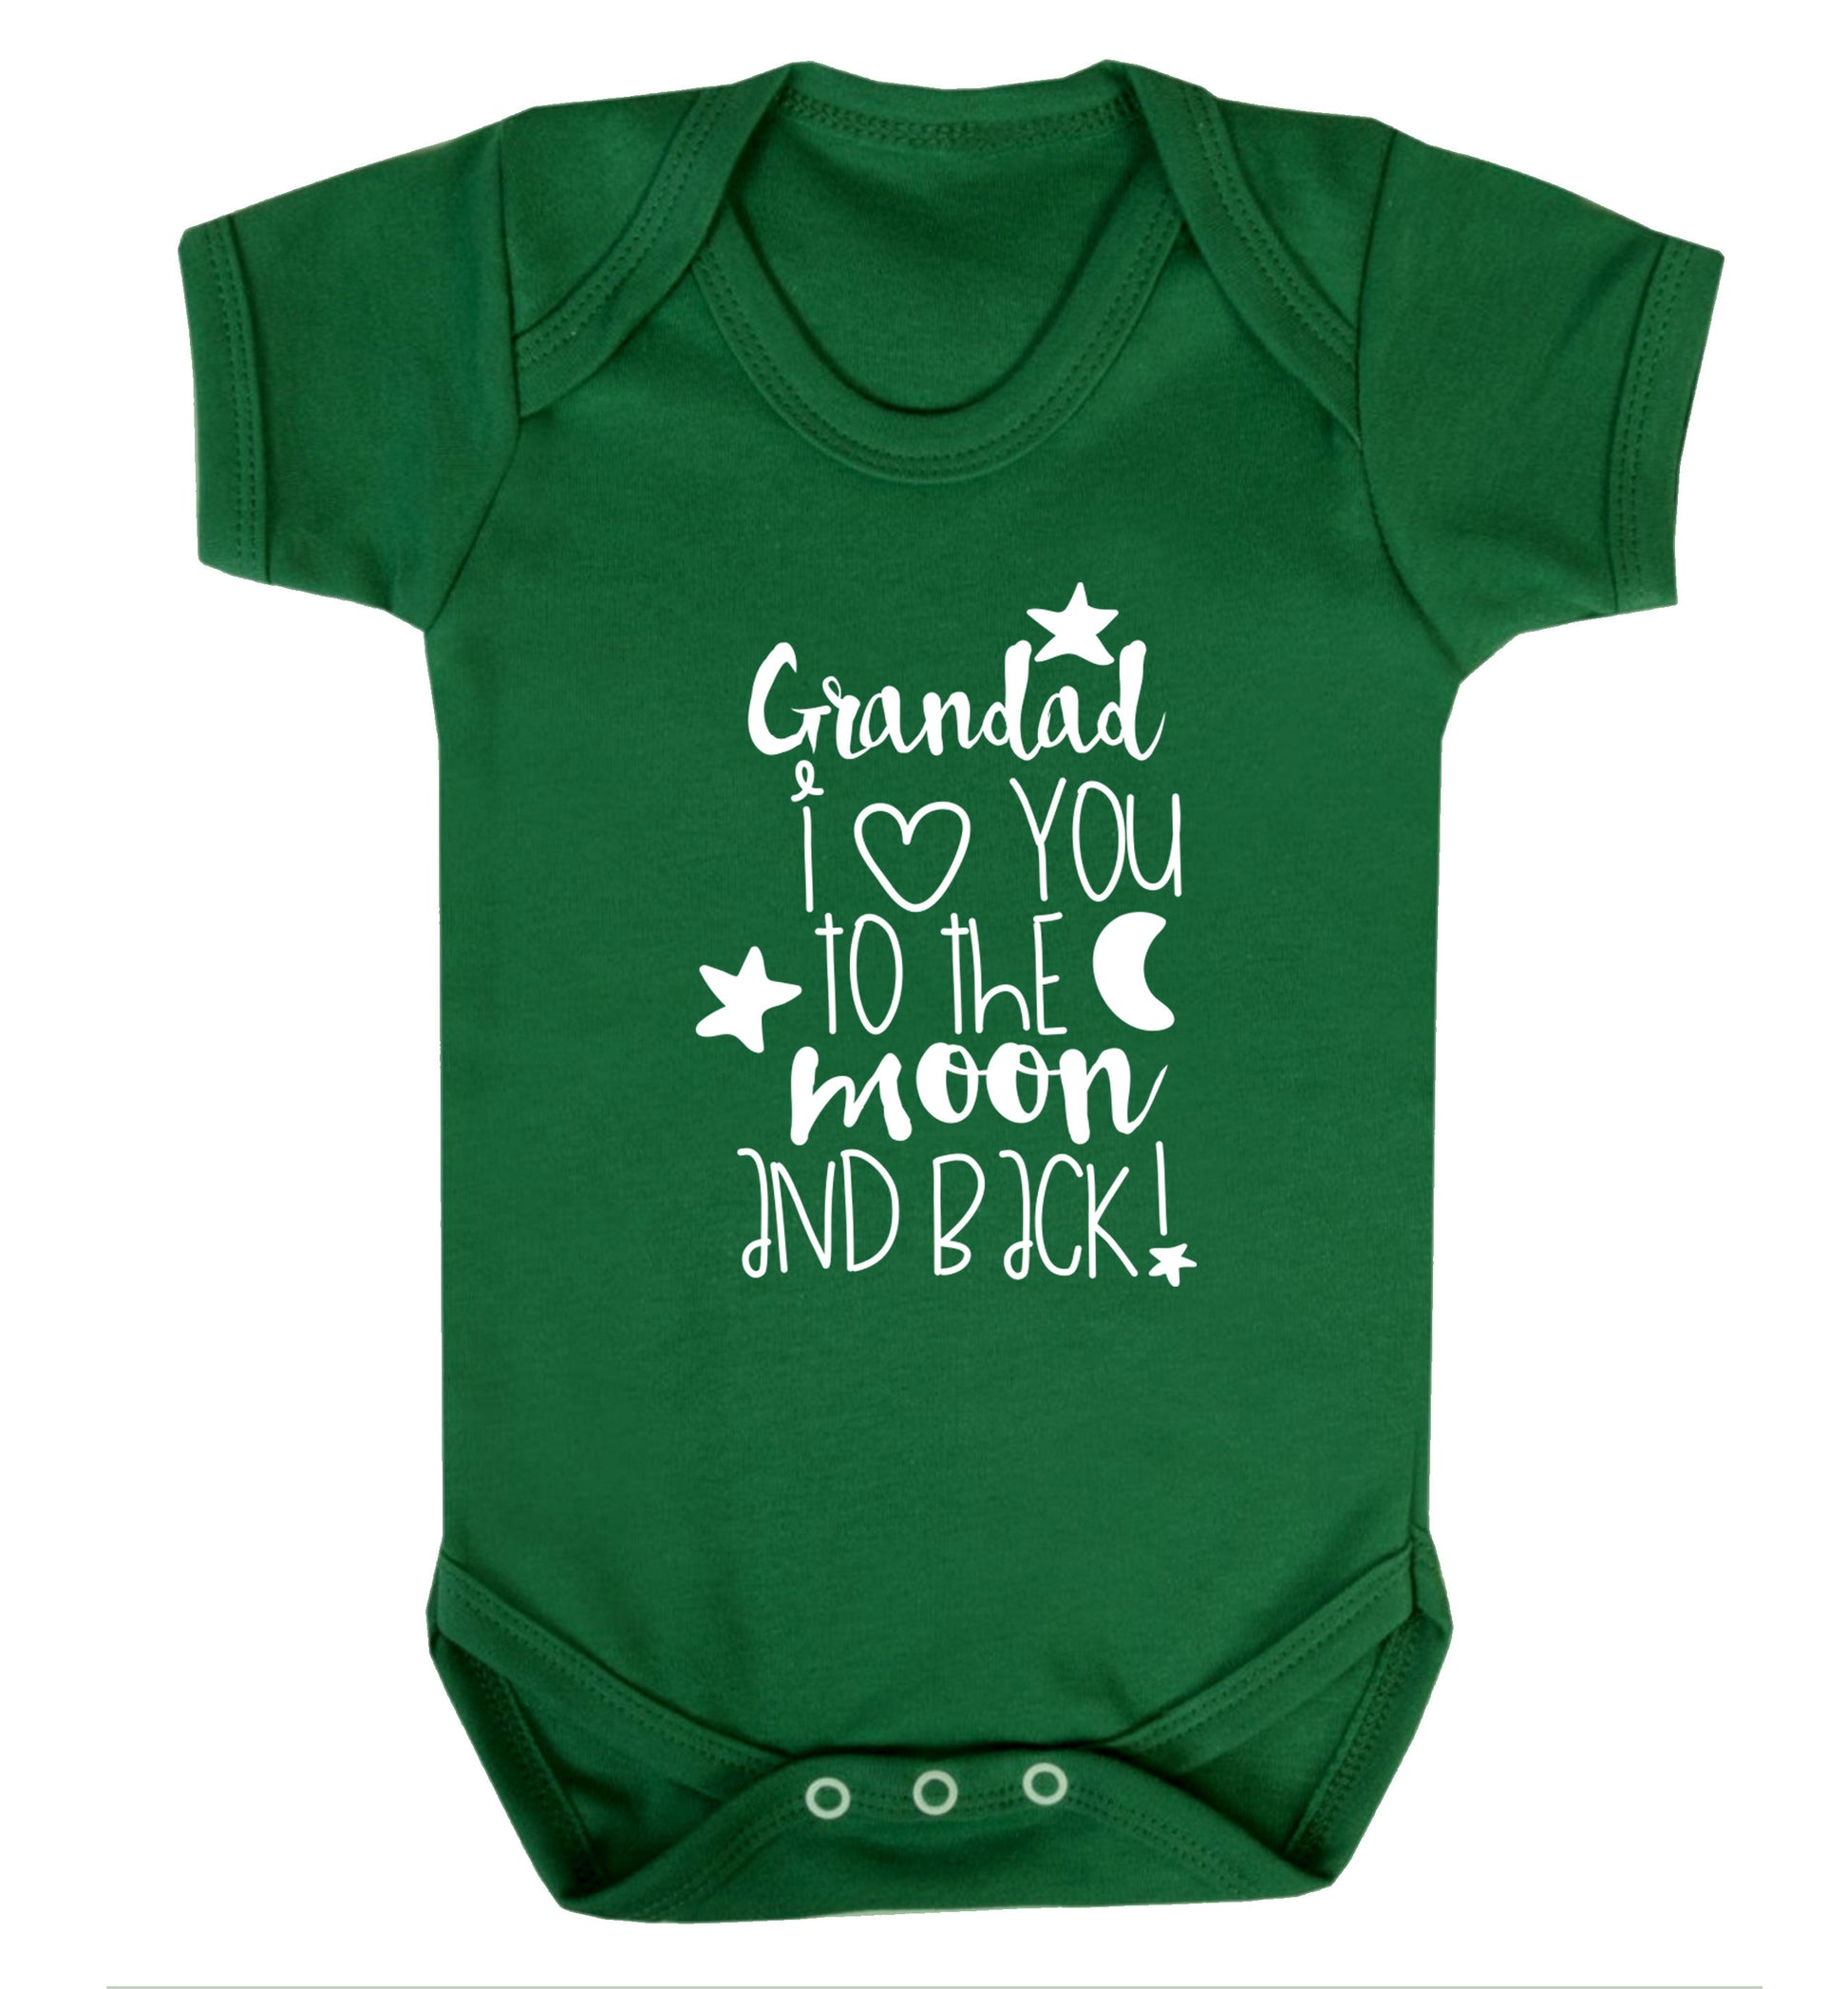 Grandad's I love you to the moon and back Baby Vest green 18-24 months